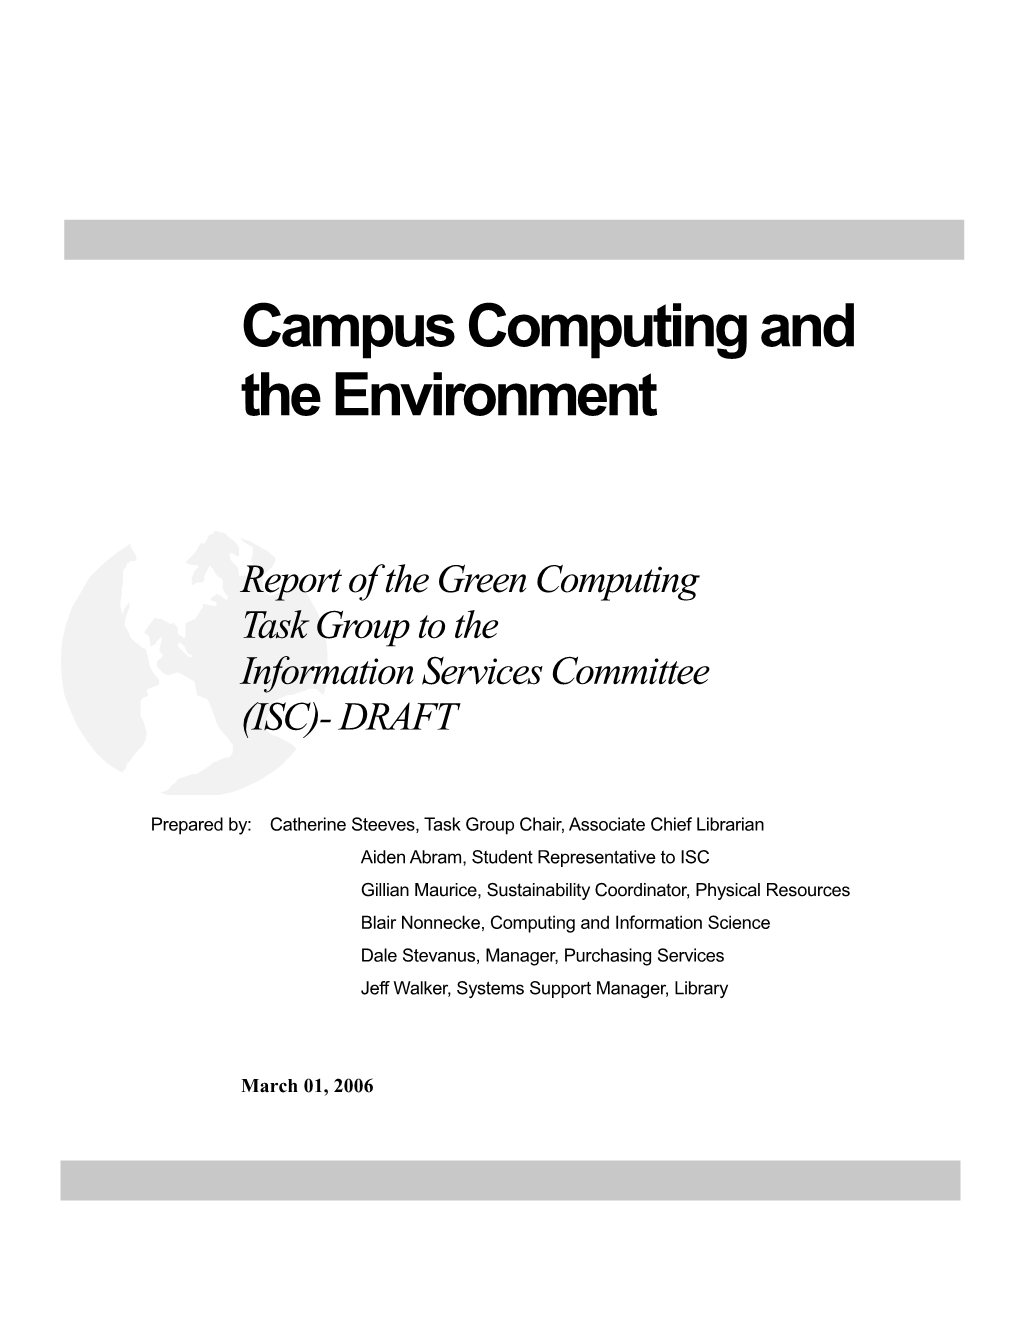 Campus Computing and the Environment